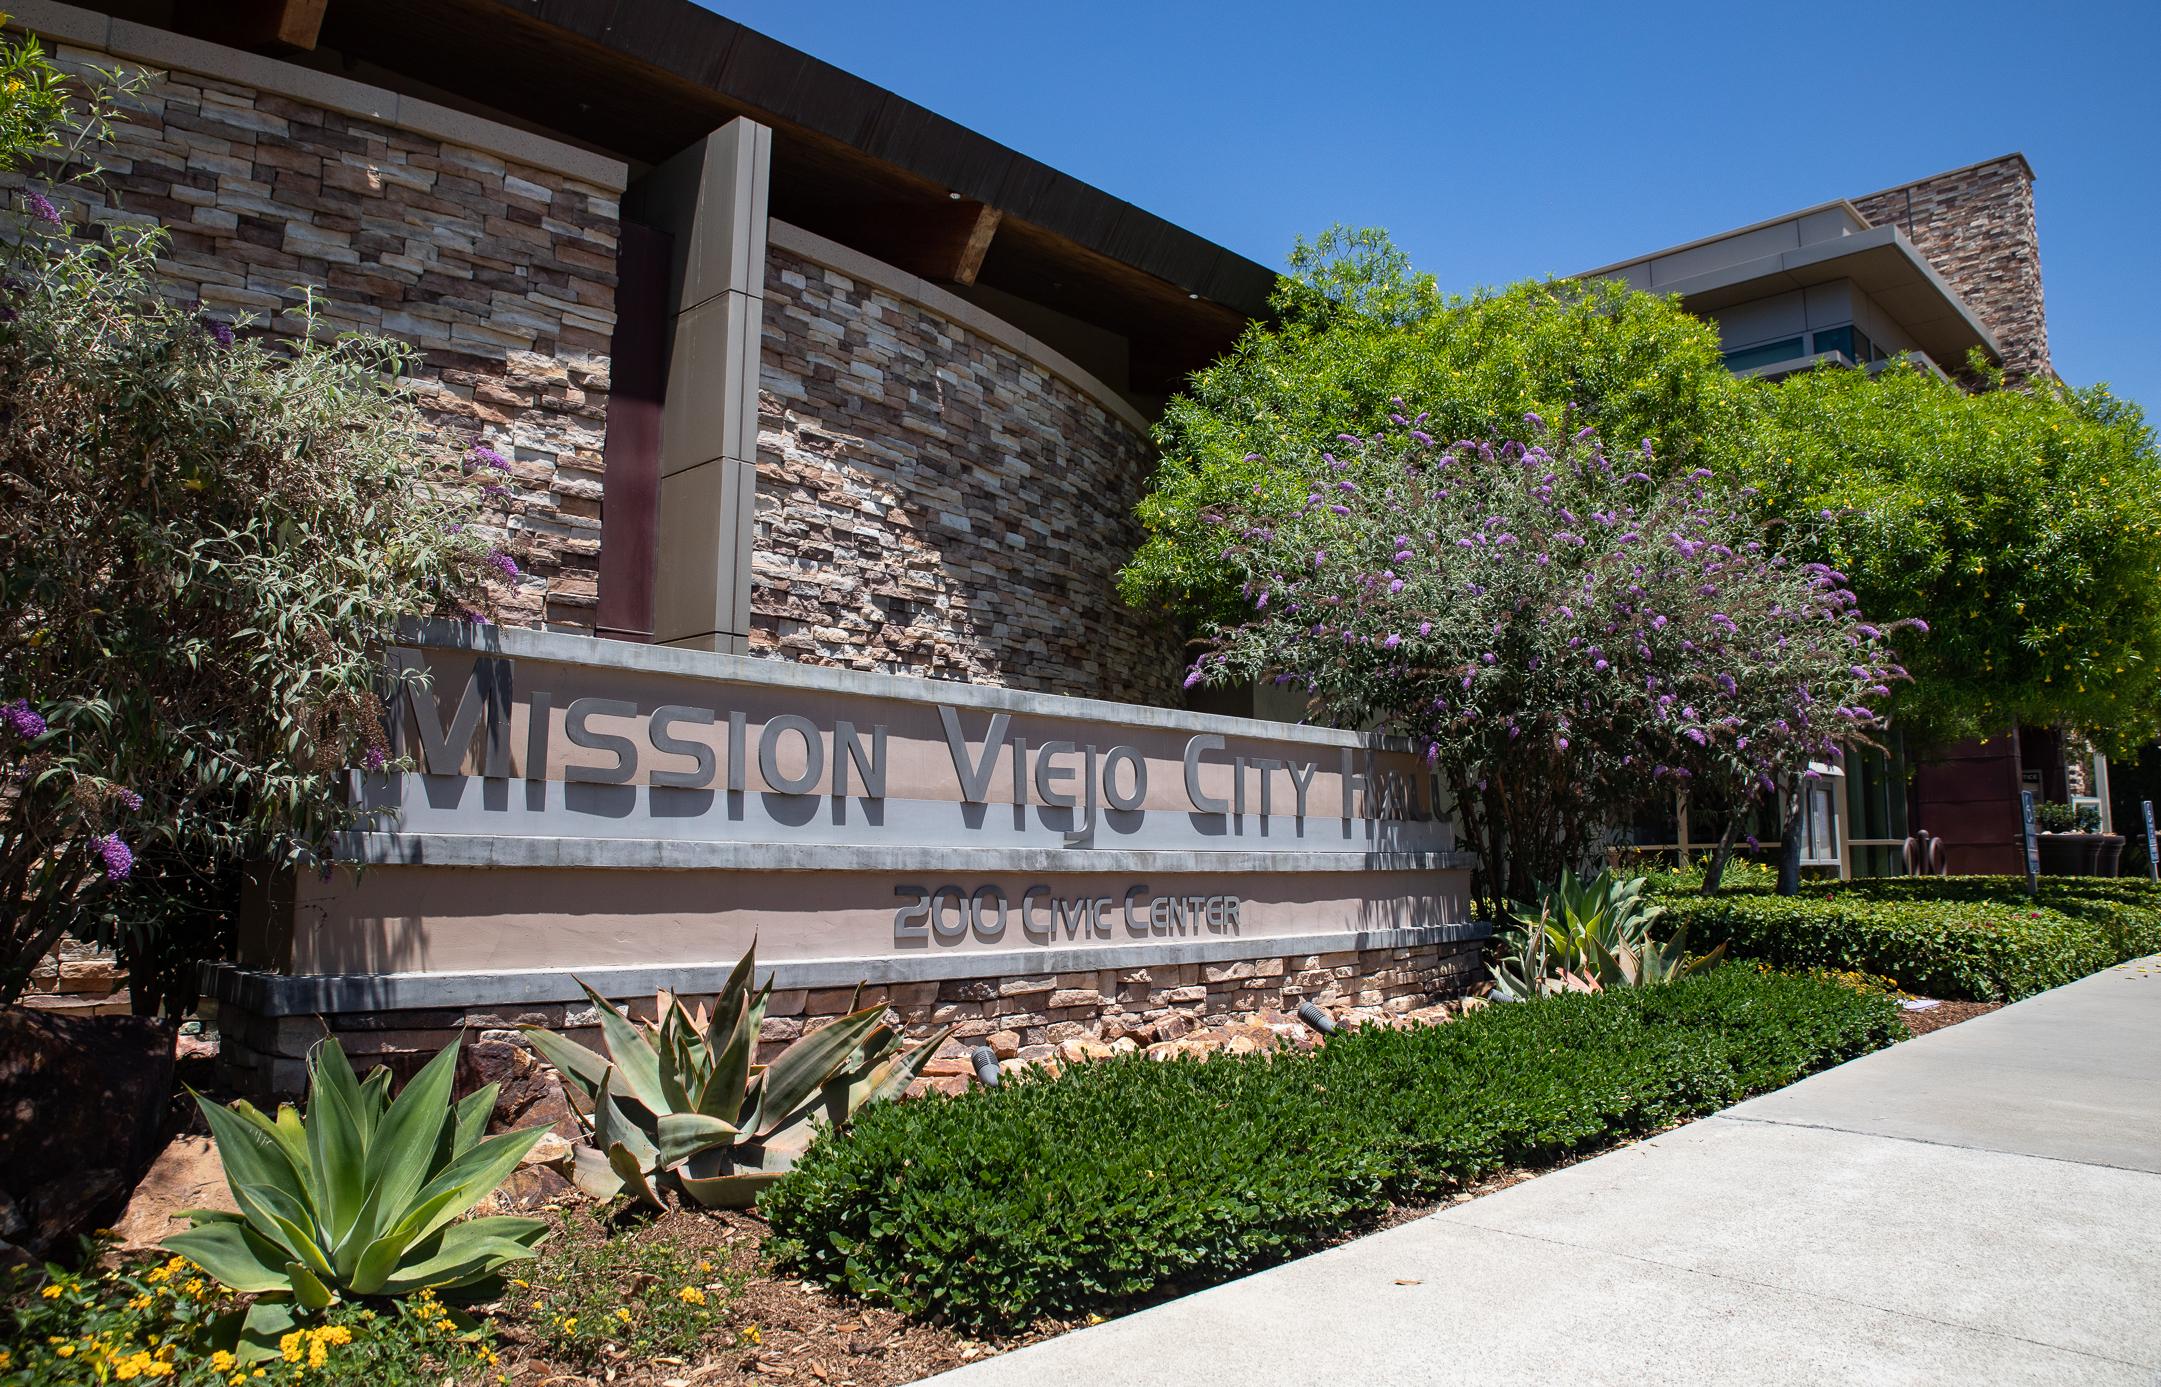 Judge Orders Mission Viejo to Pay $700,000 in Legal Fees for Term Limit Lawsuits